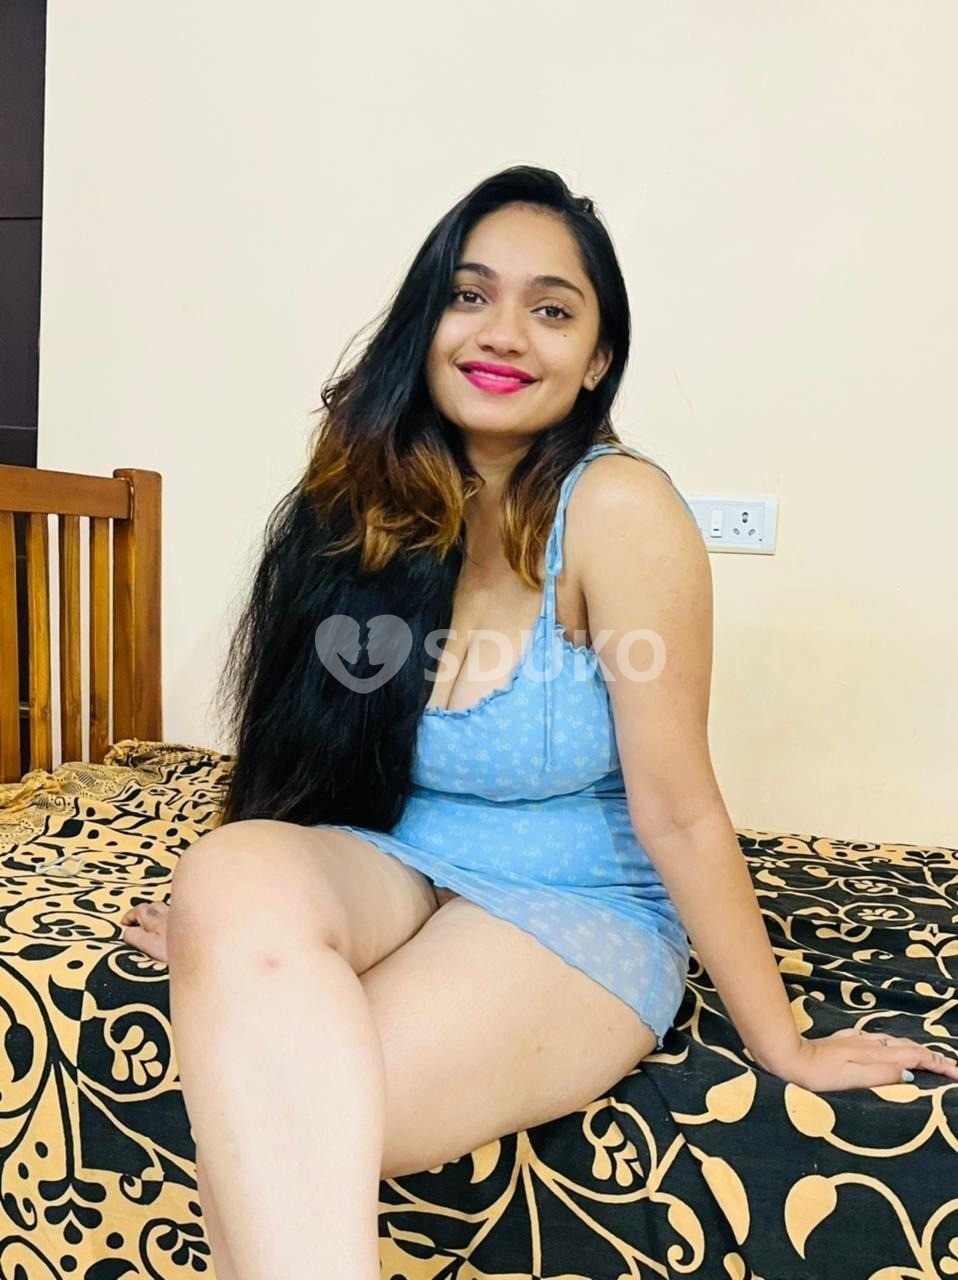 ❣️DAHOD MY SELF JAYA BEST VIP HIGH PROFILE COLLEGE GIRLS HOUSEWIFE HOTEL AND HOME SERVICE AVAILABLE call me